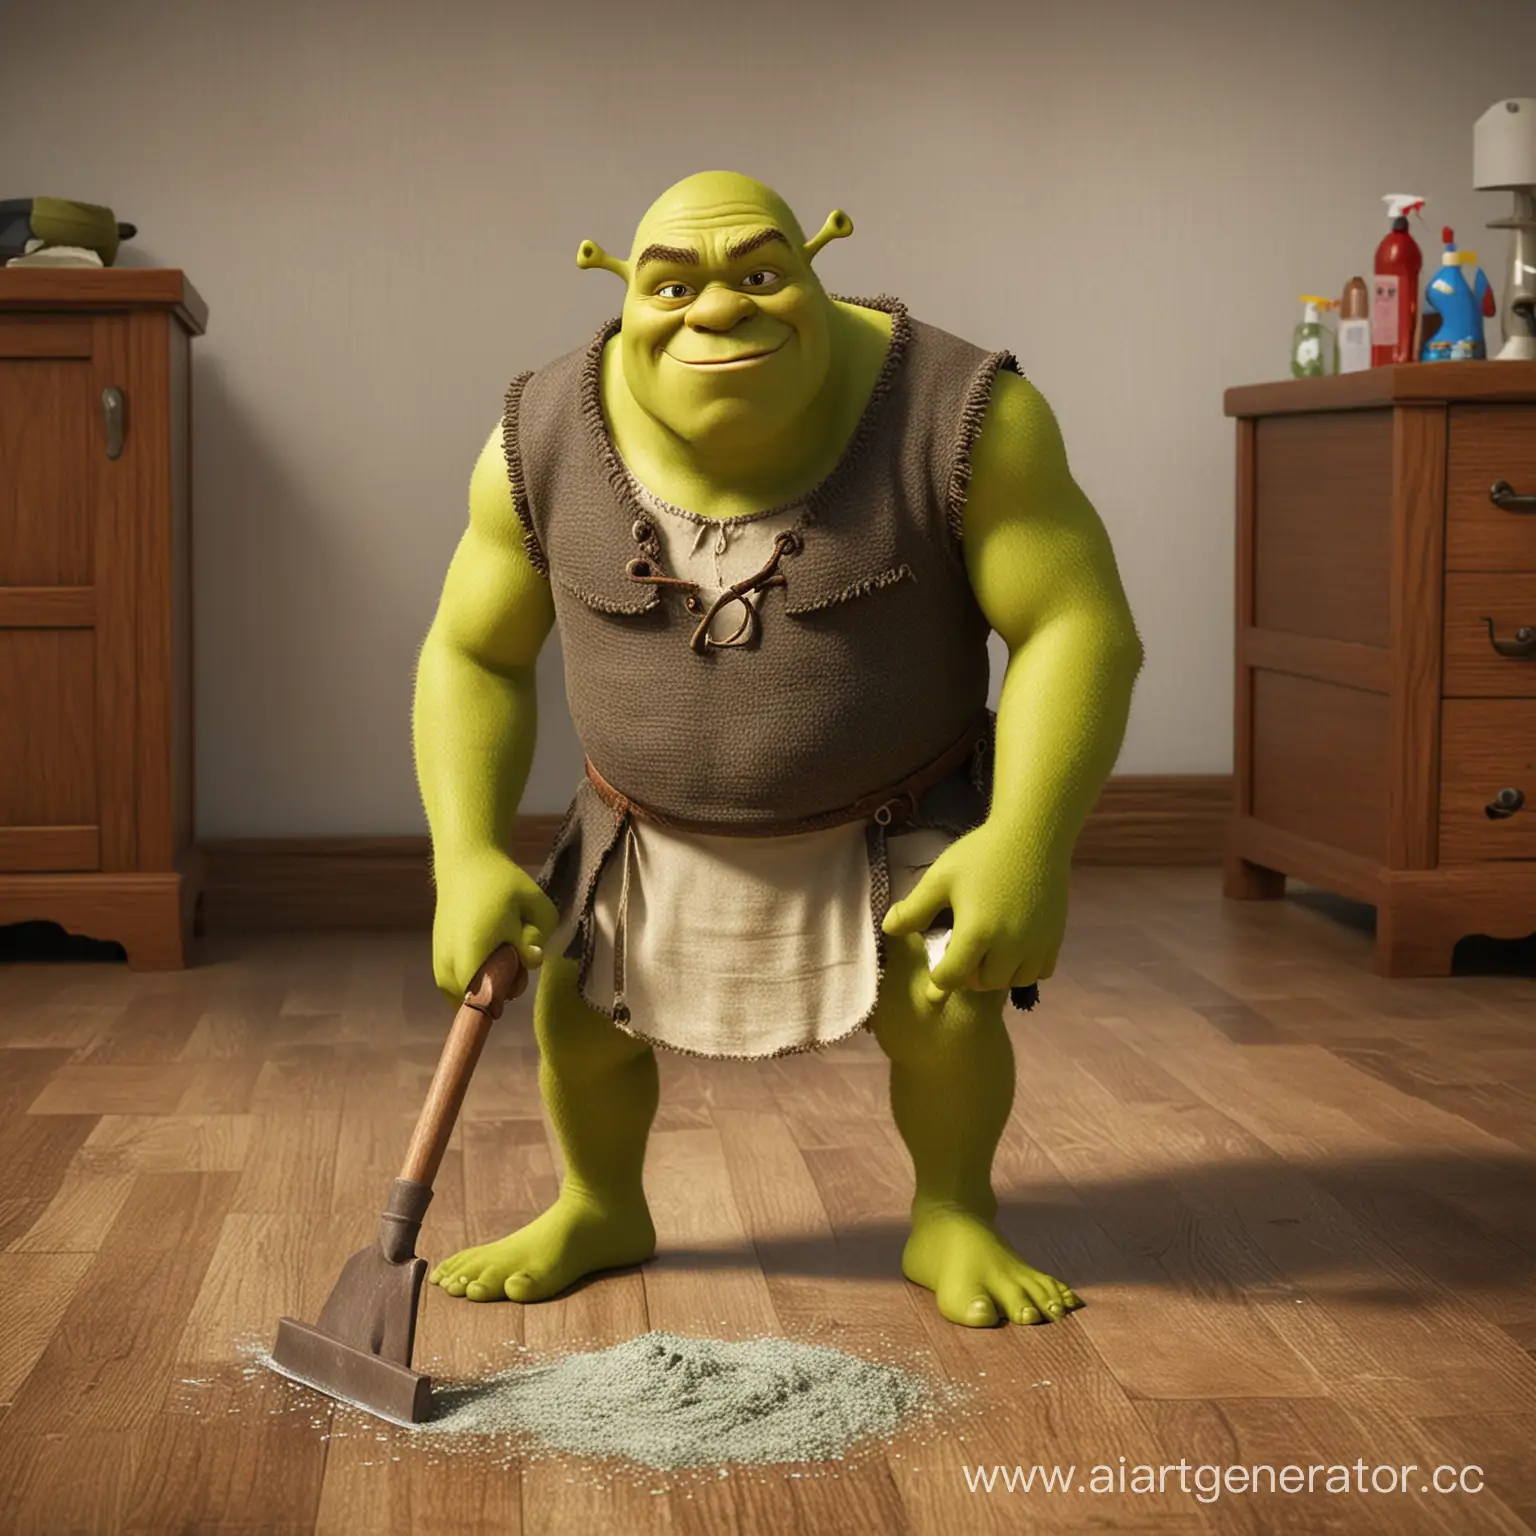 Ogre-Character-Shrek-Tidying-Up-a-Messy-Living-Space